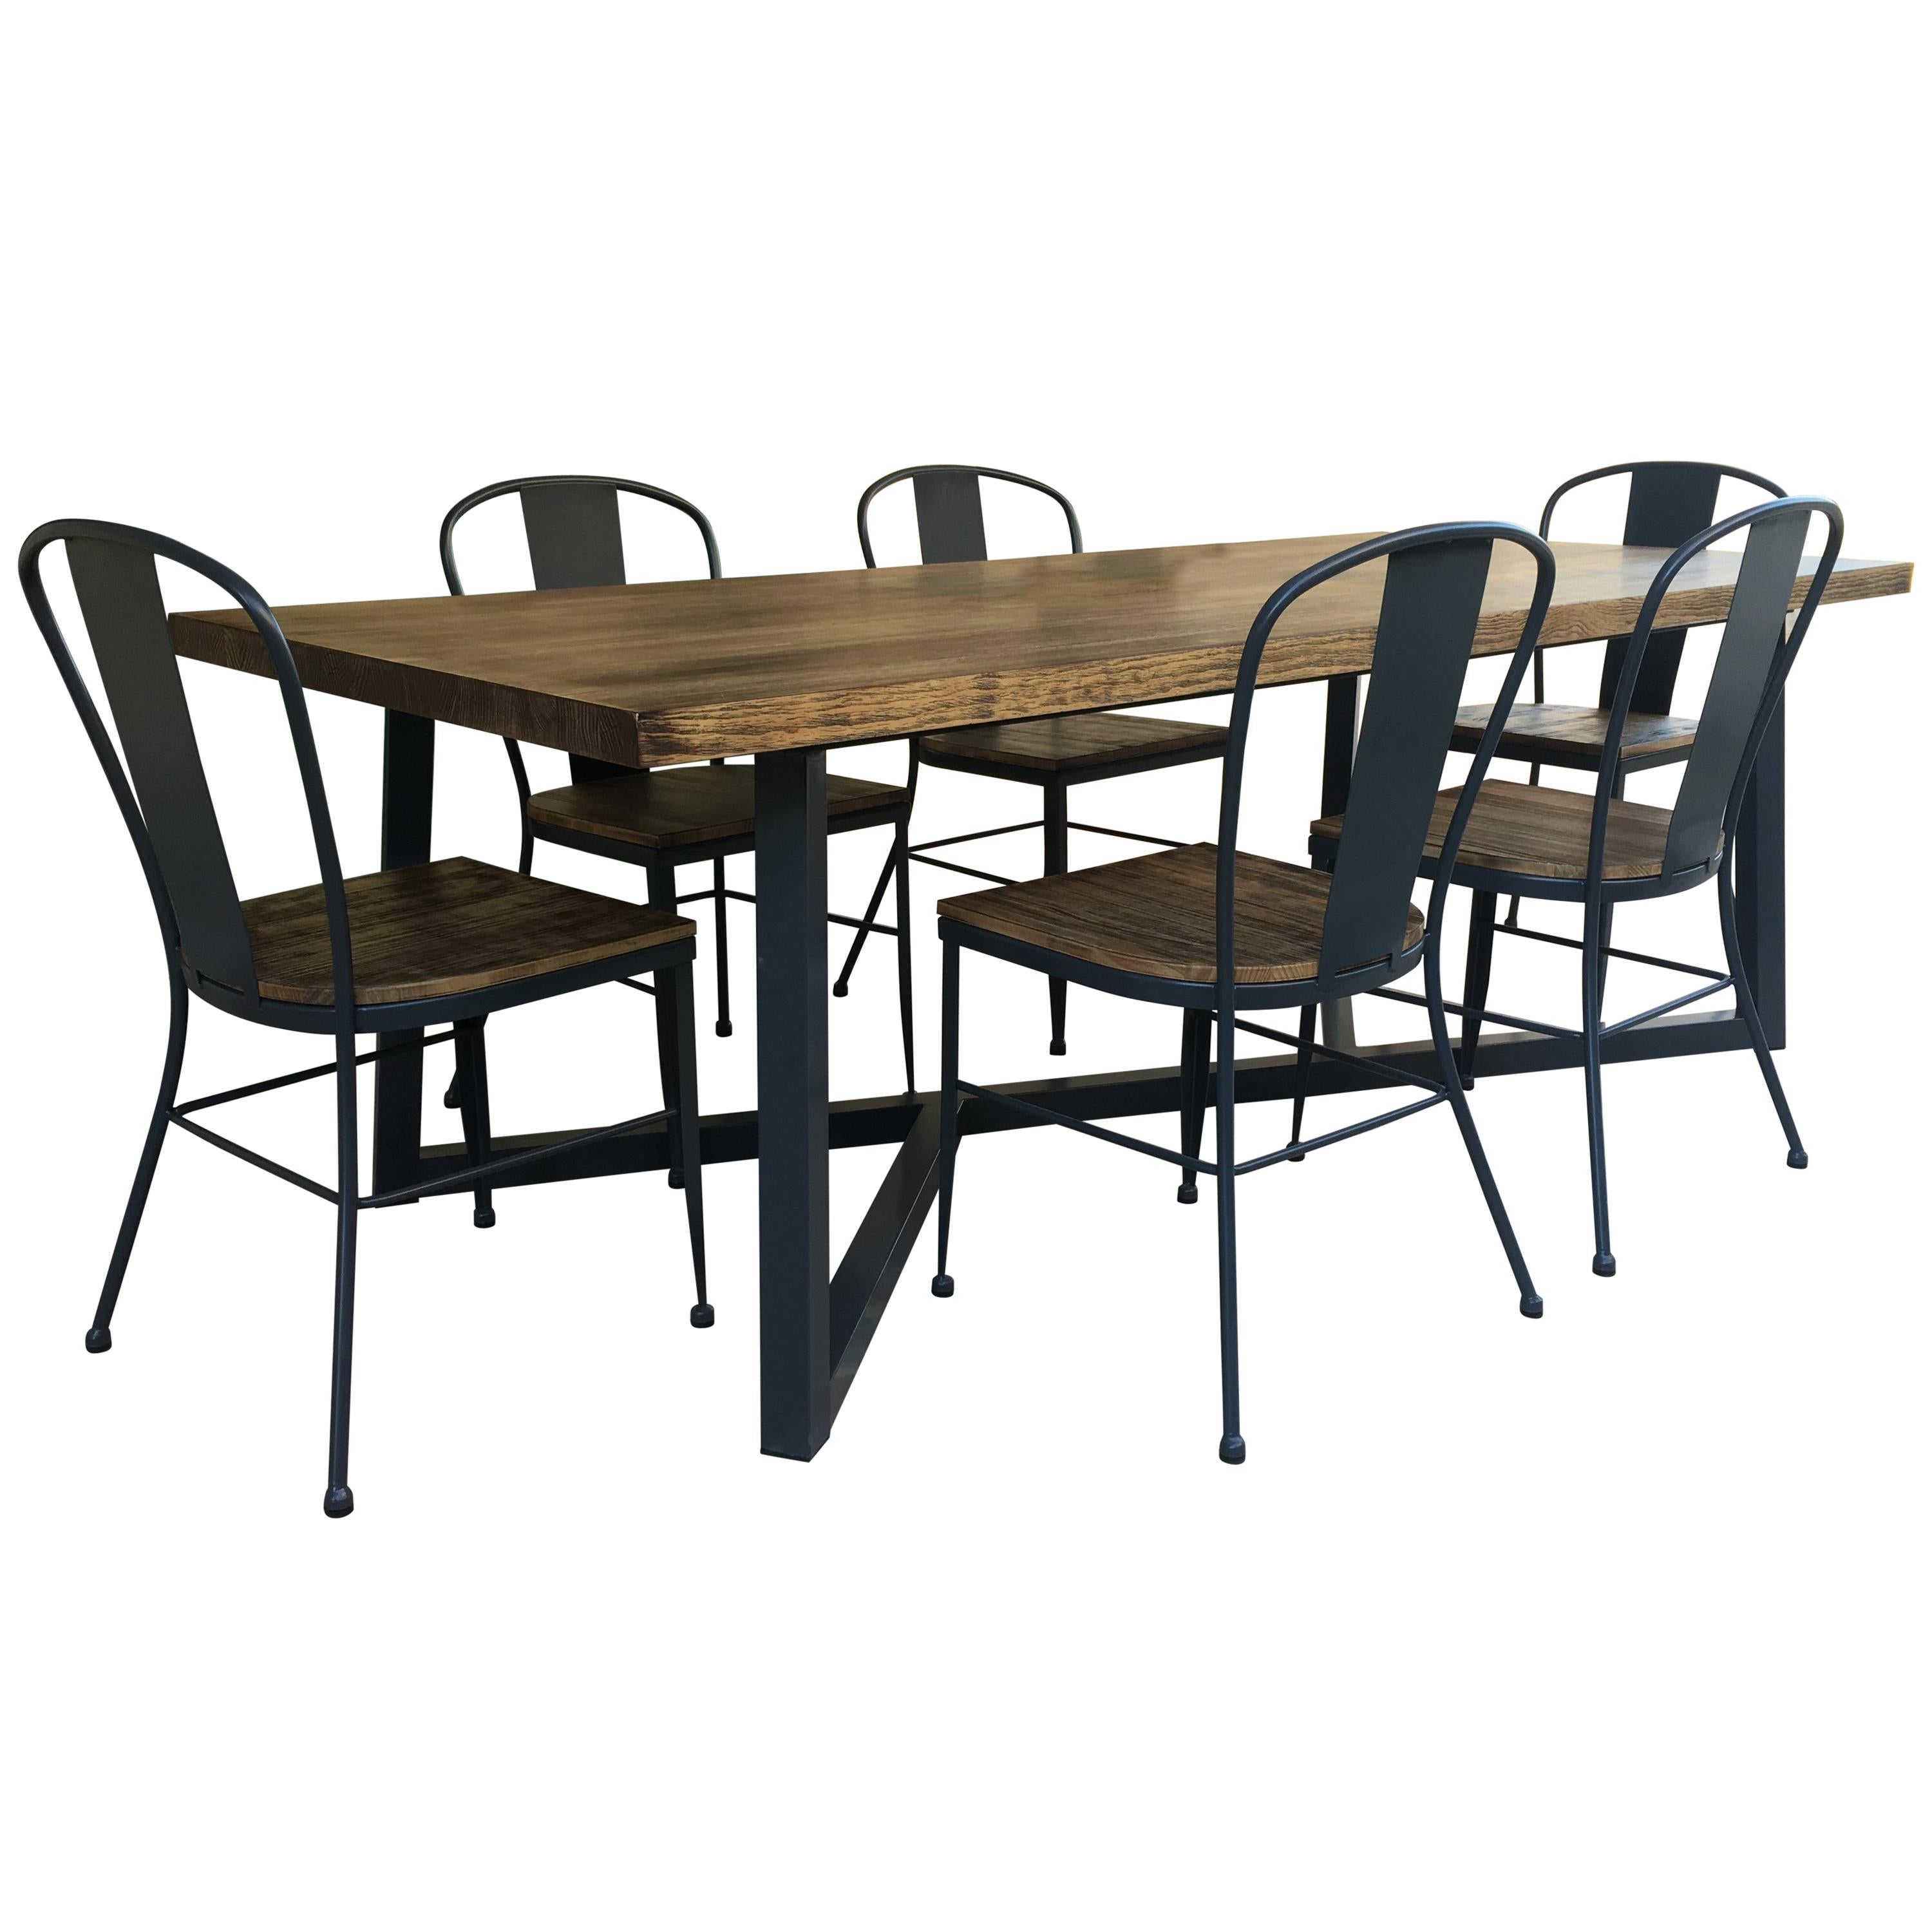 21st Century Wrought Iron Set of Patio Dining Table & Chairs. Indoor & Outdoor